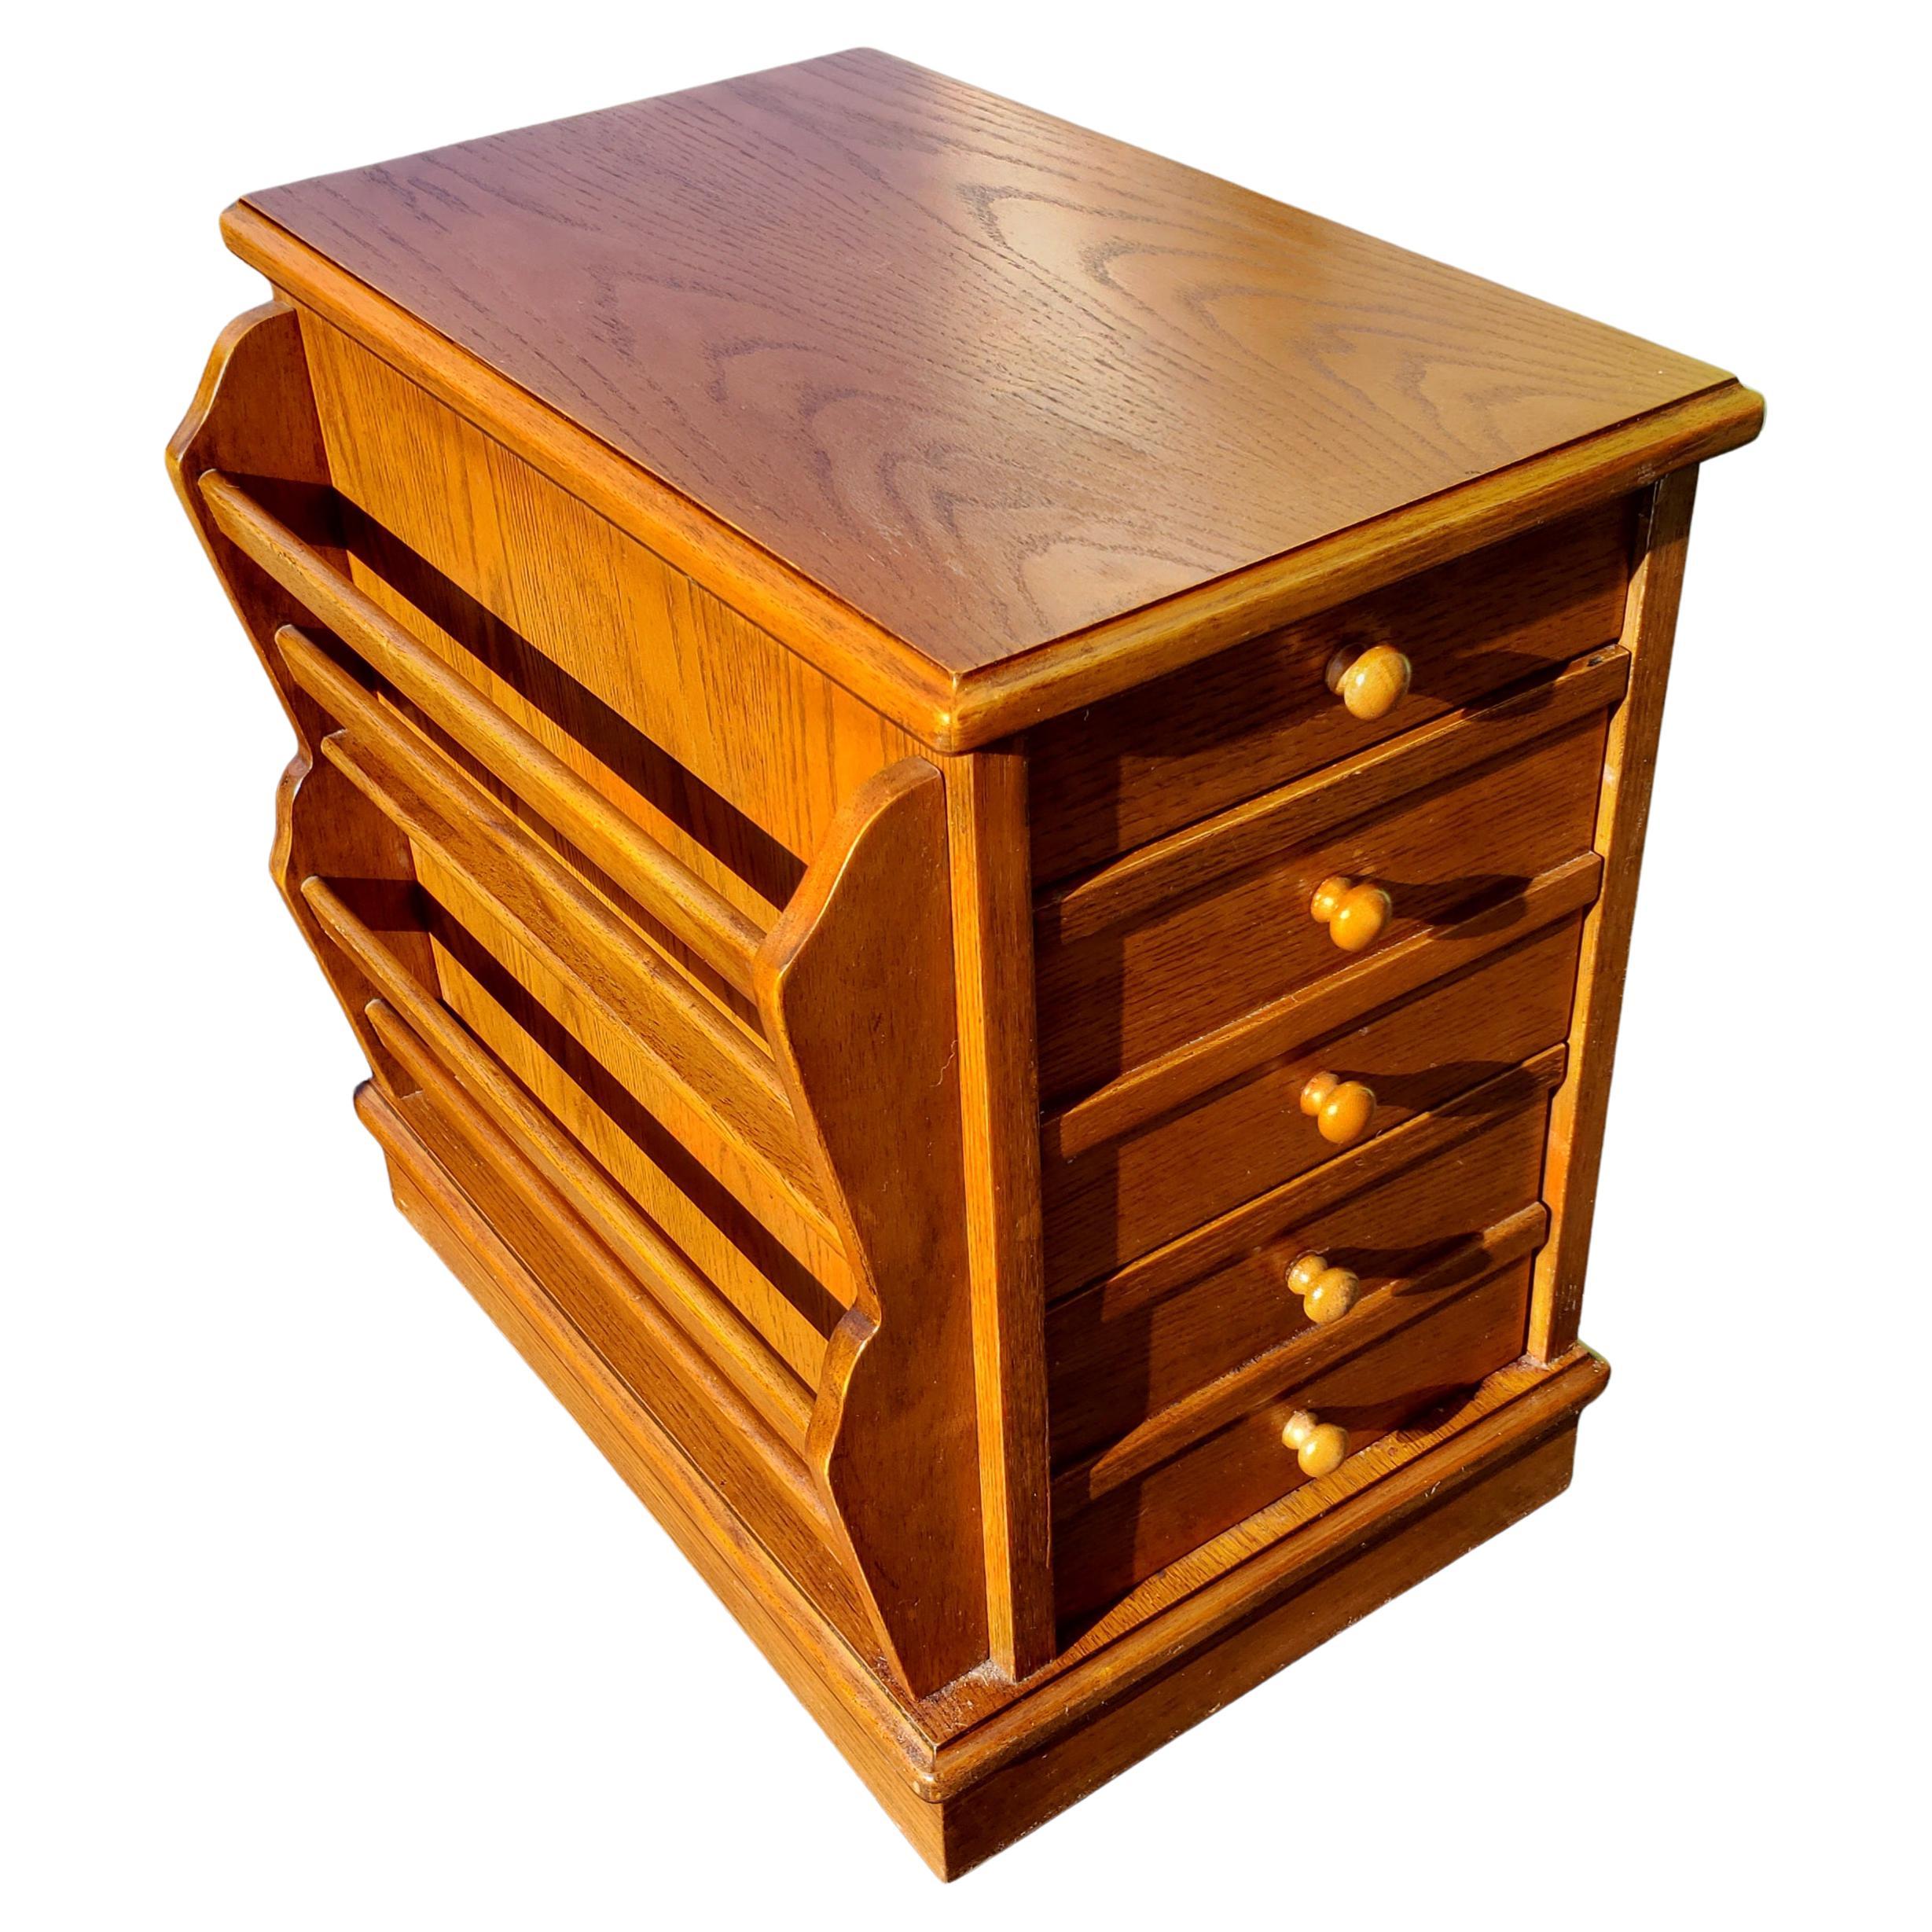 Rare set of solid oak side tables magazines racks from the 1970s. Amish crafted in Pennsylvania. 
Feature 3 drawers. Top drawer consists of a hot proof drink coaster and desert plate coaster and two bottom deep drawers. Dovetail drawers and wood